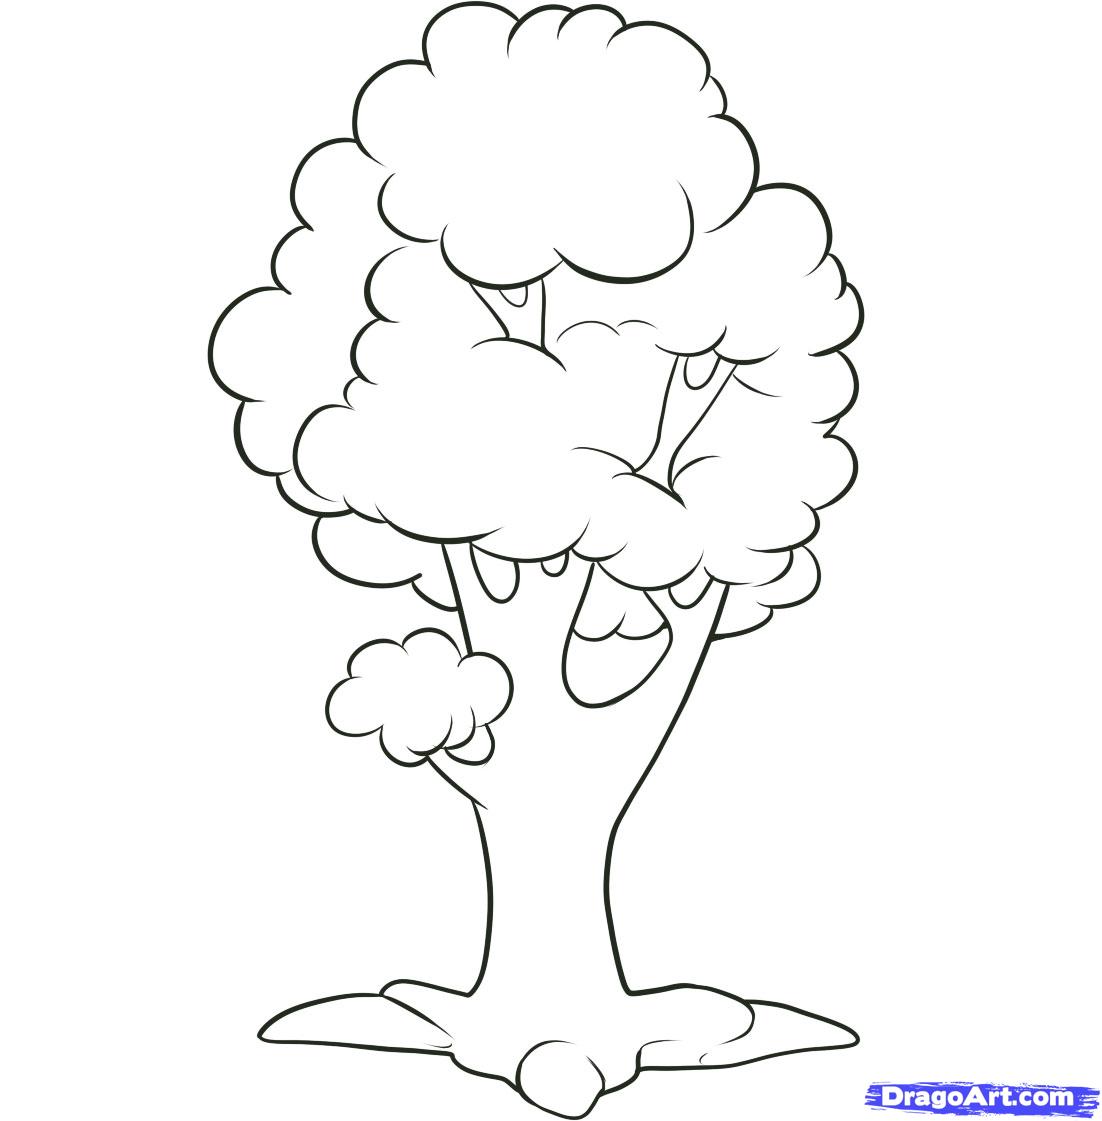 How to Draw an Easy Tree, Step by Step, Trees, Pop Culture, FREE 